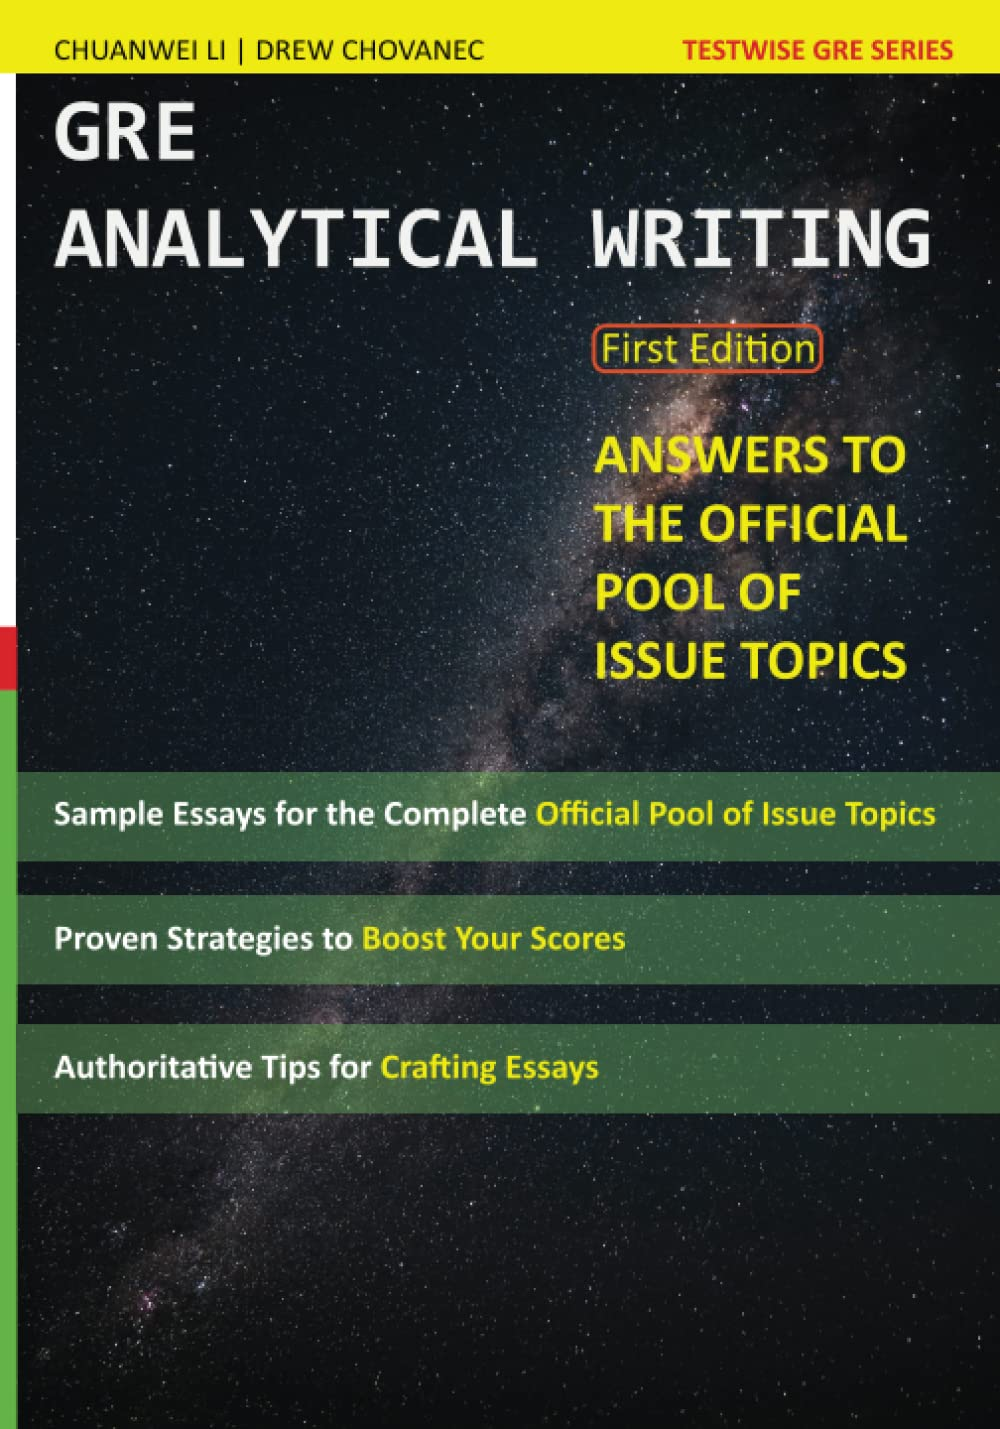 Testwise GRE Prep’s GRE Analytical Writing